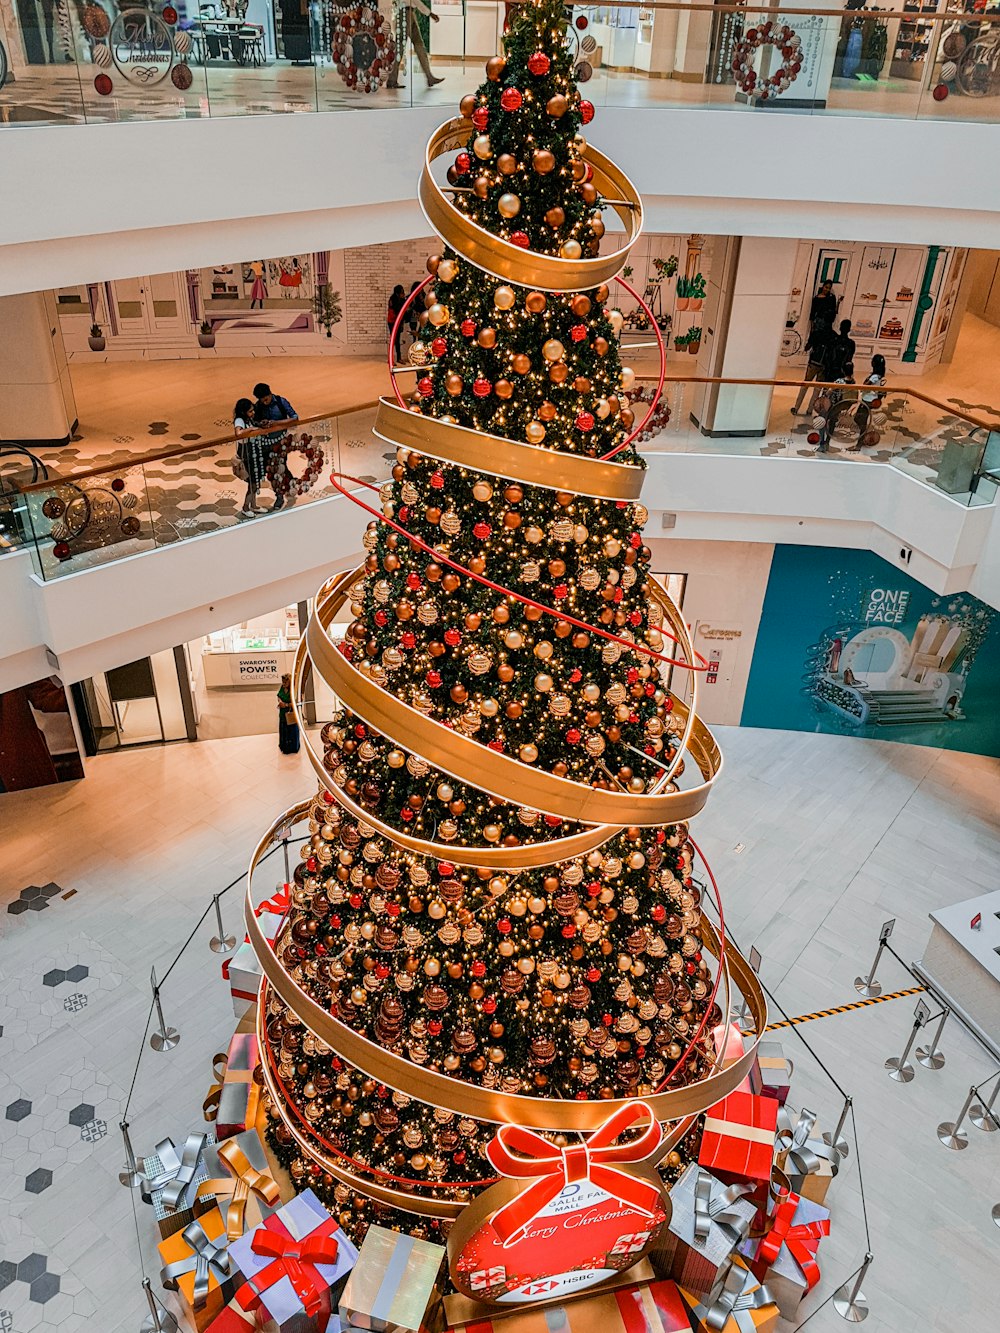 a large decorated tree in a building